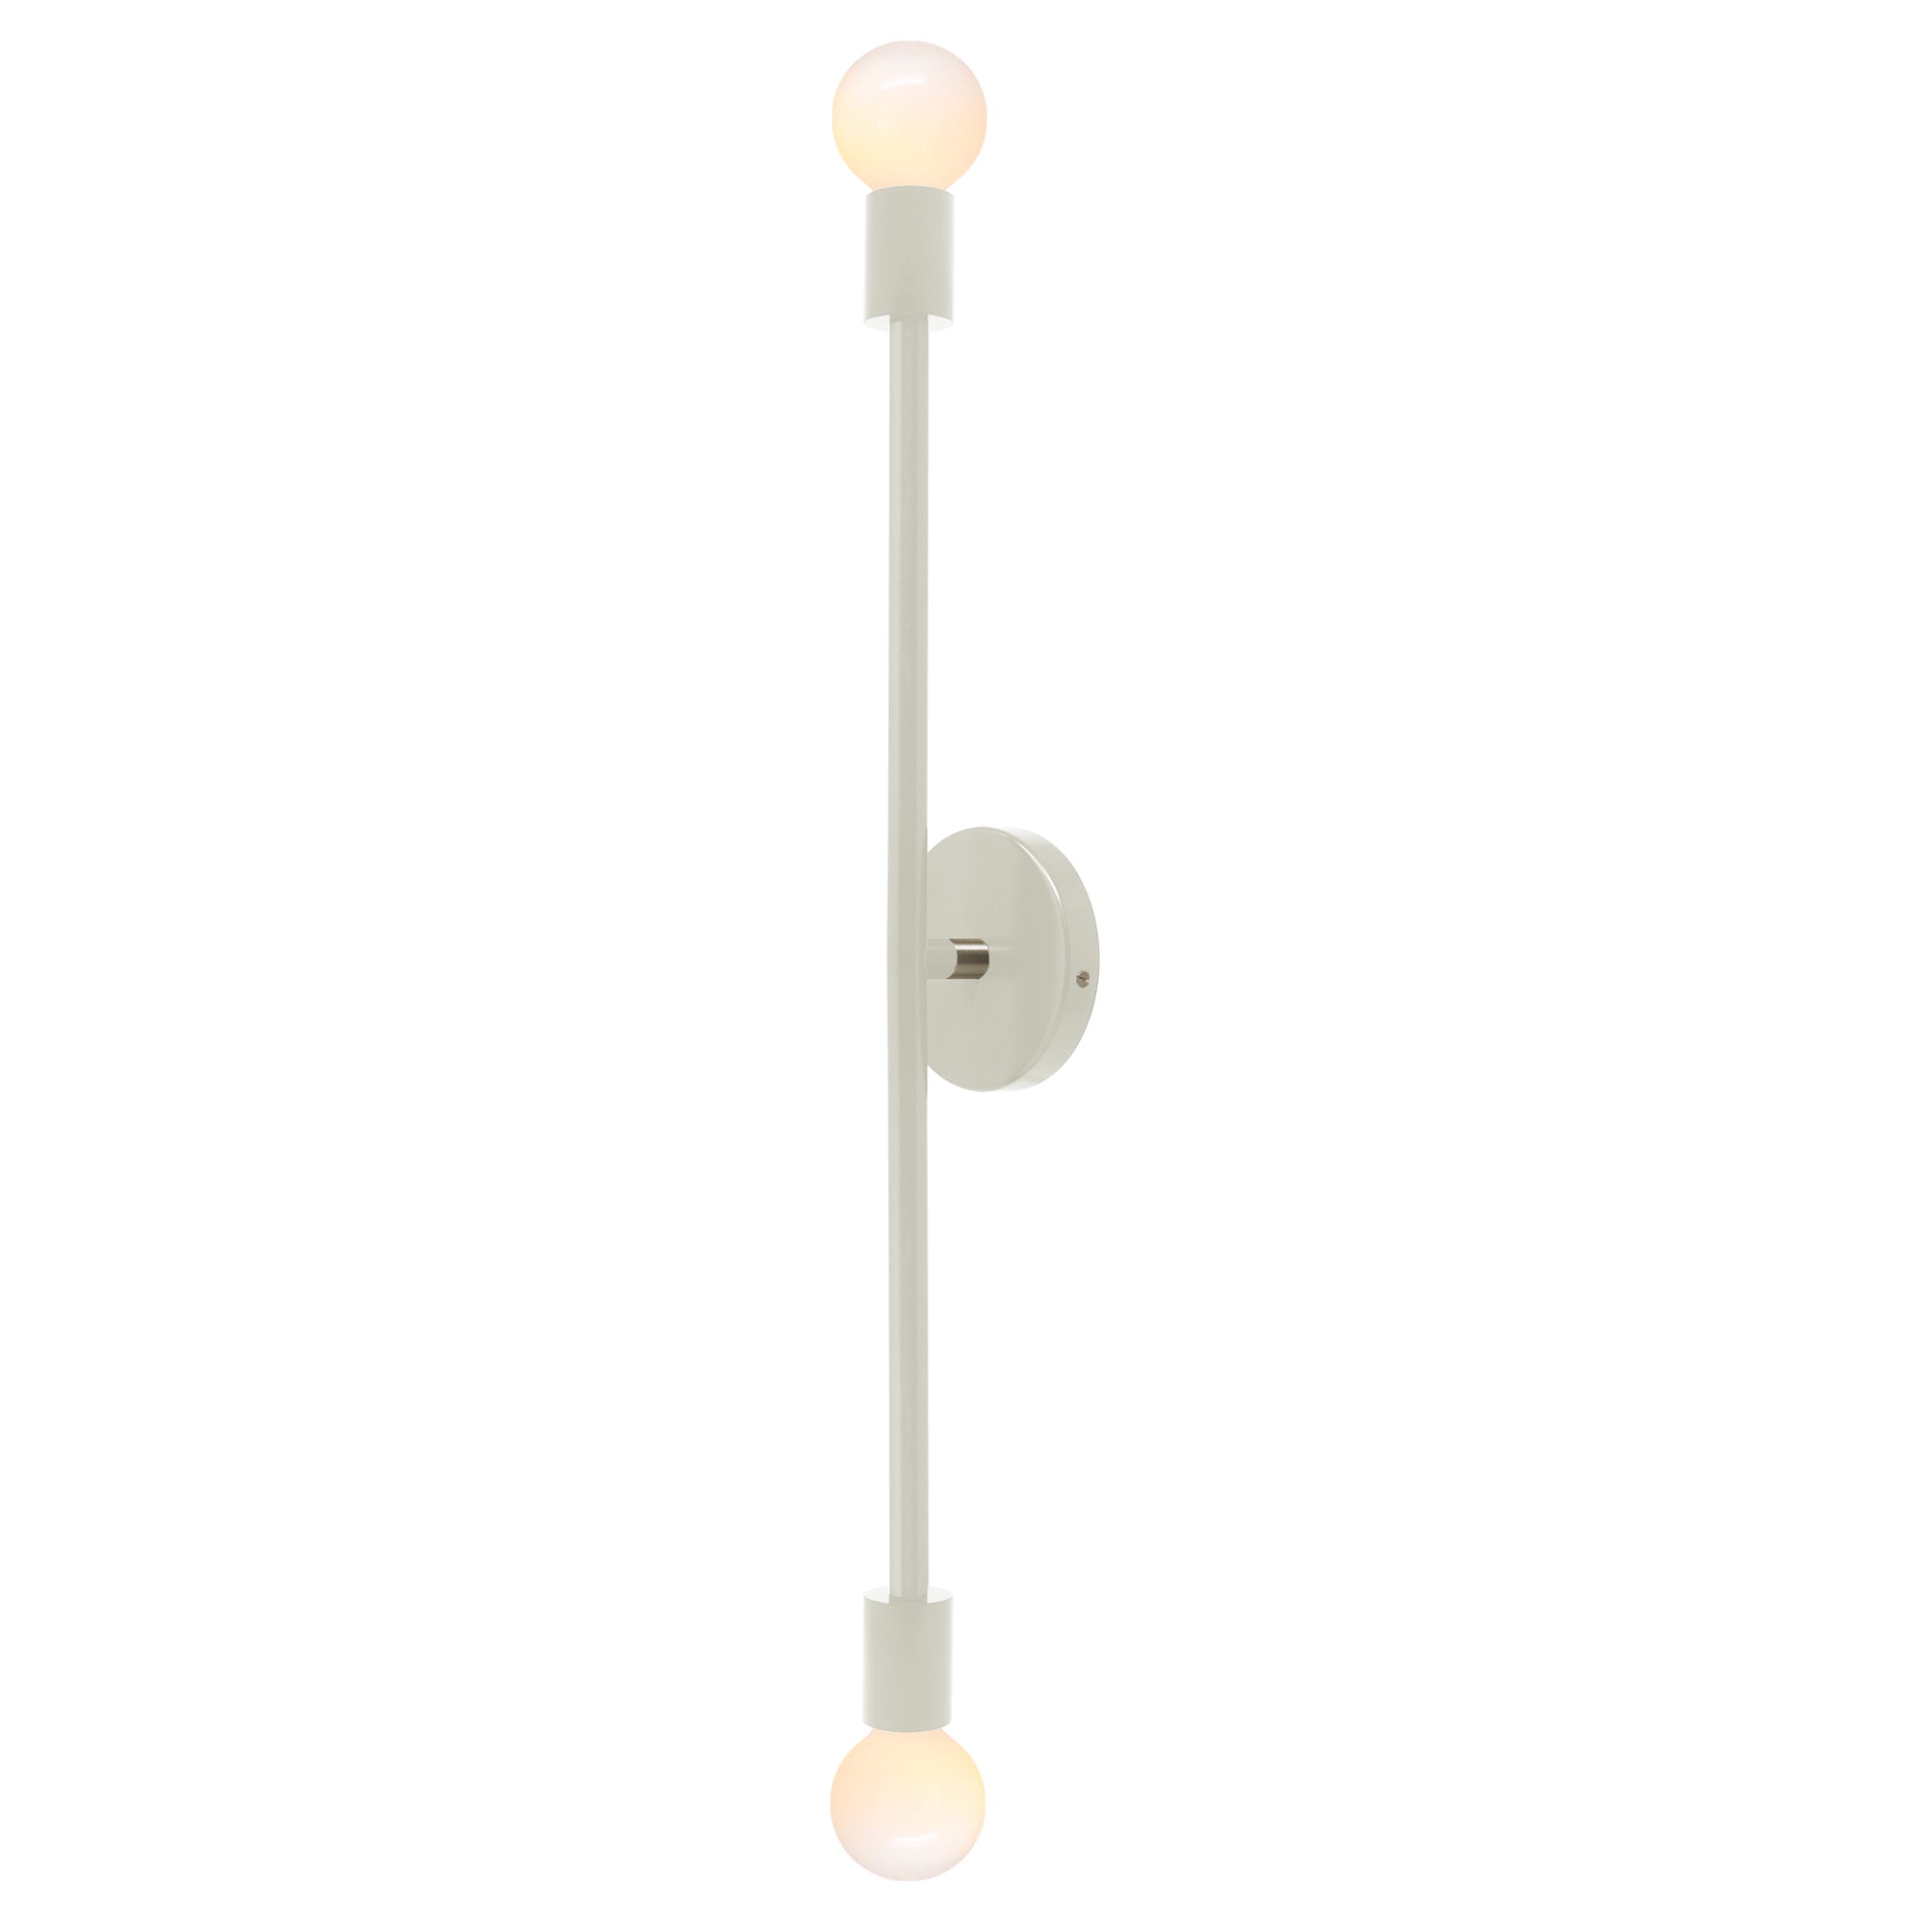 Nickel and bone color Pilot sconce 29" Dutton Brown lighting